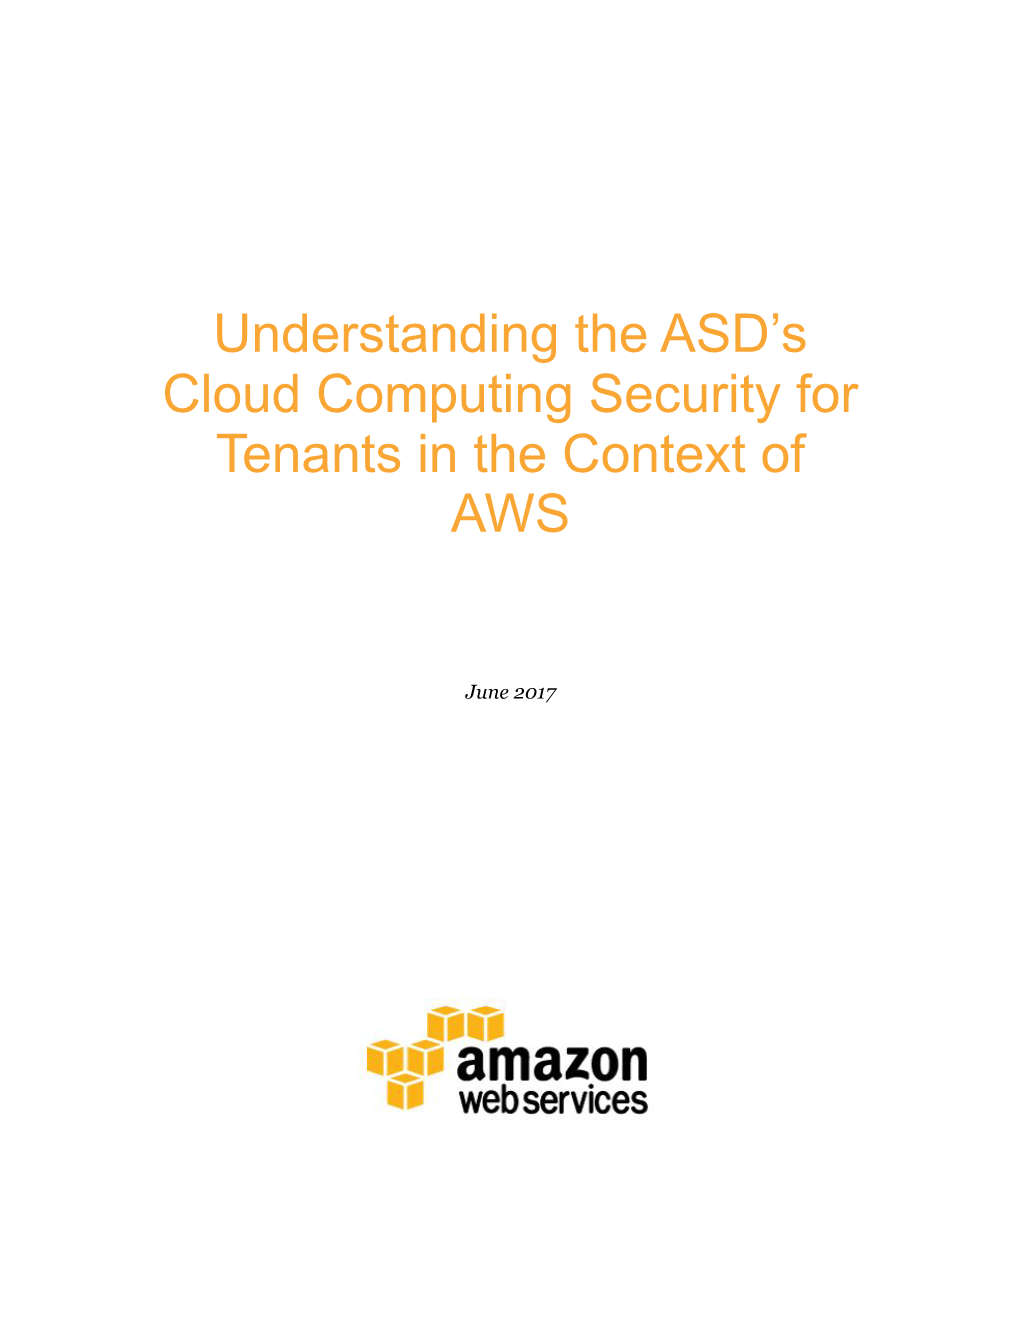 Understanding the ASD's Cloud Computing Security for Tenants In